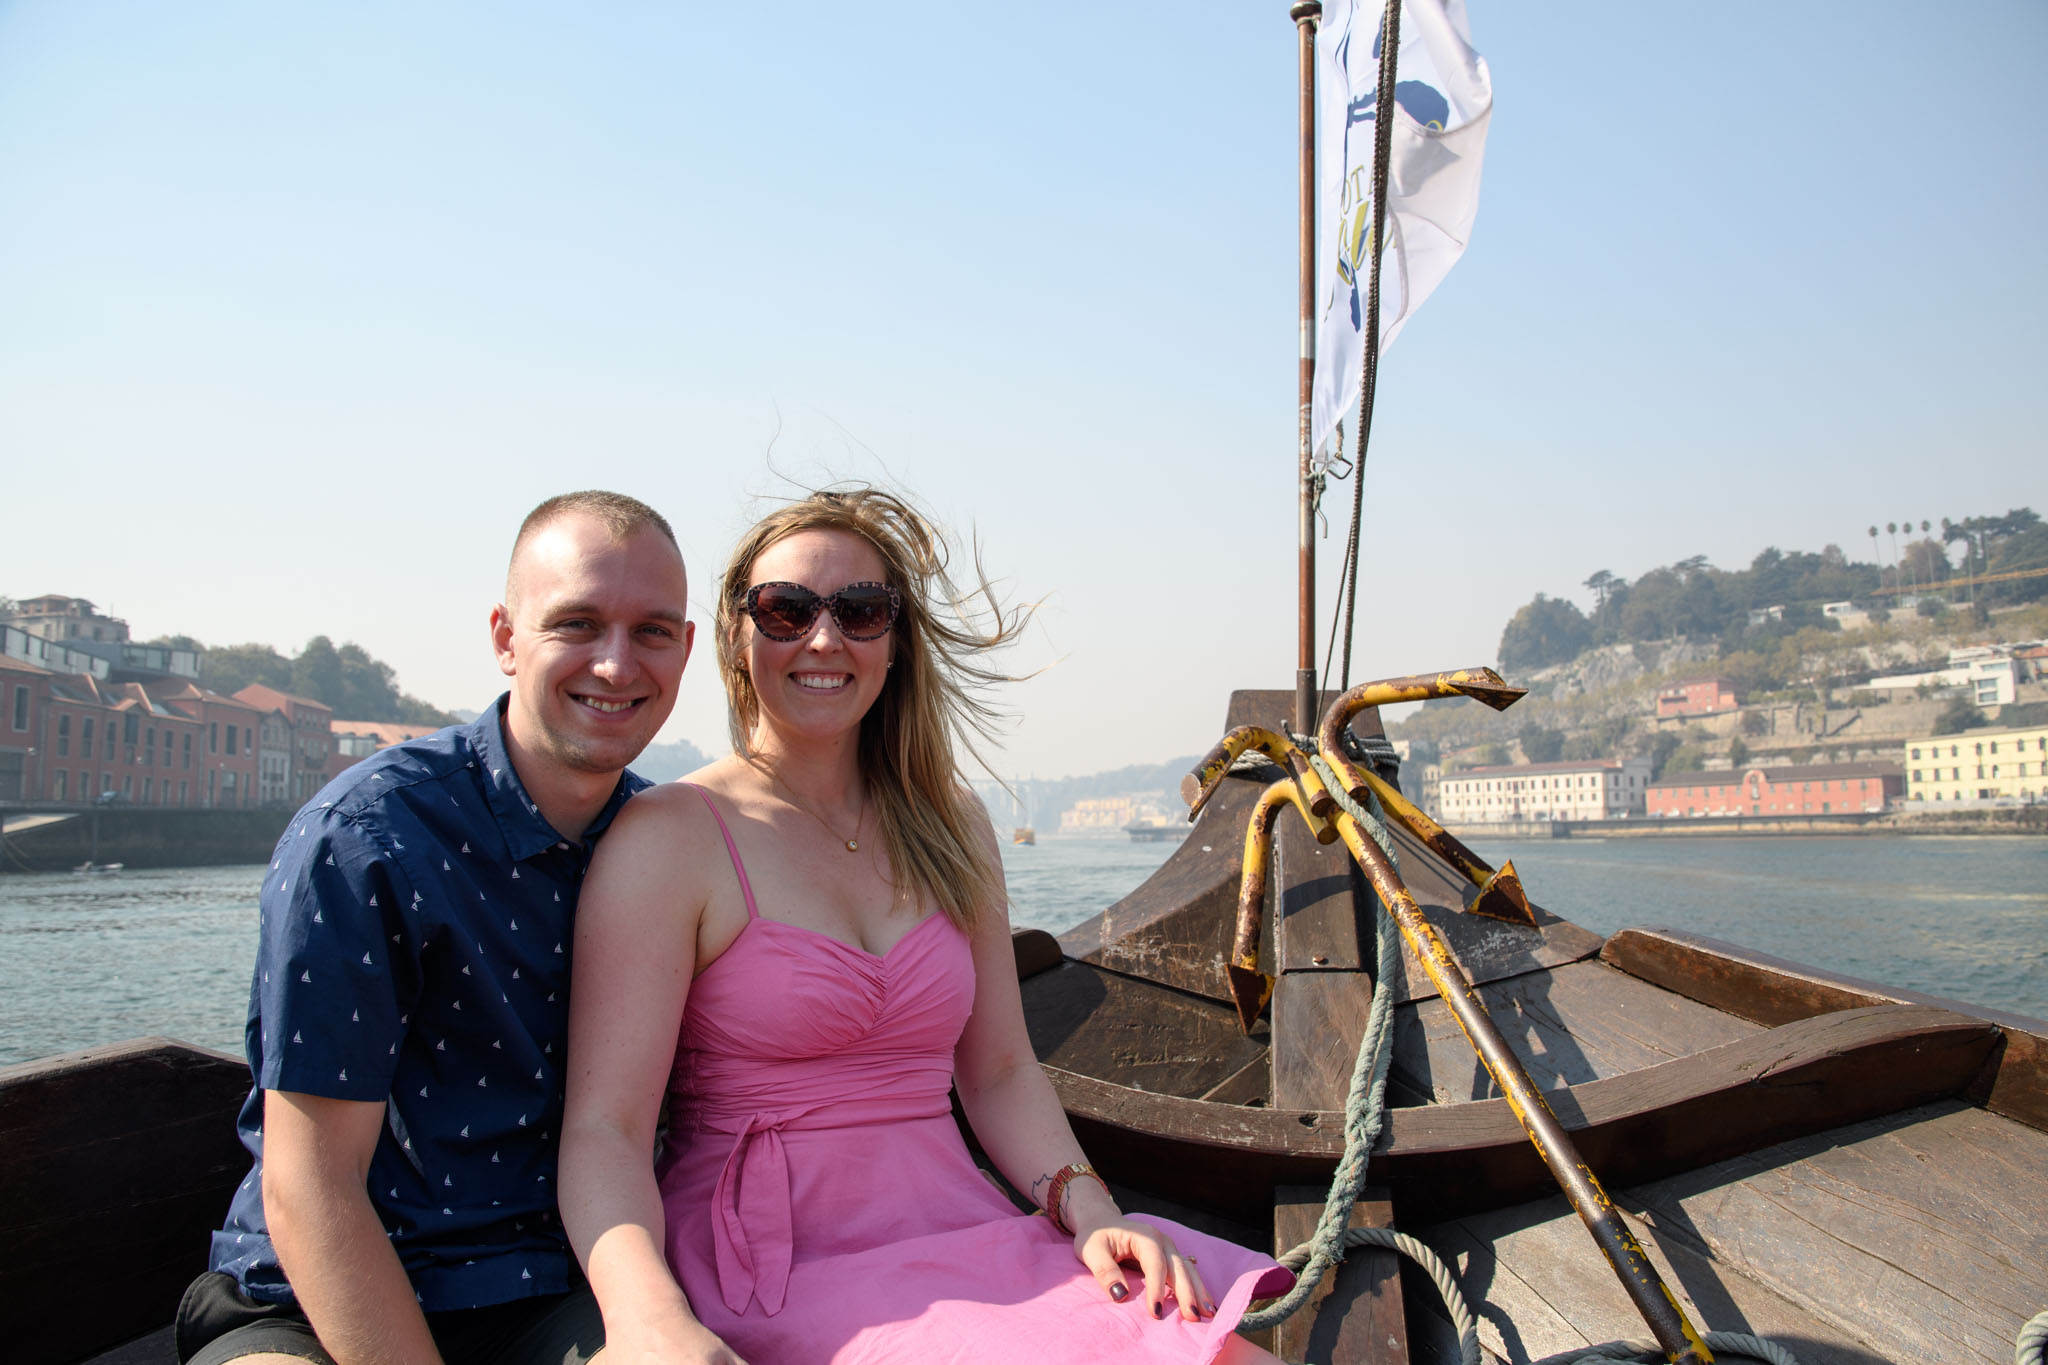 Ben and Erinn on the Six Bridges boat tour in Porto, Portugal.